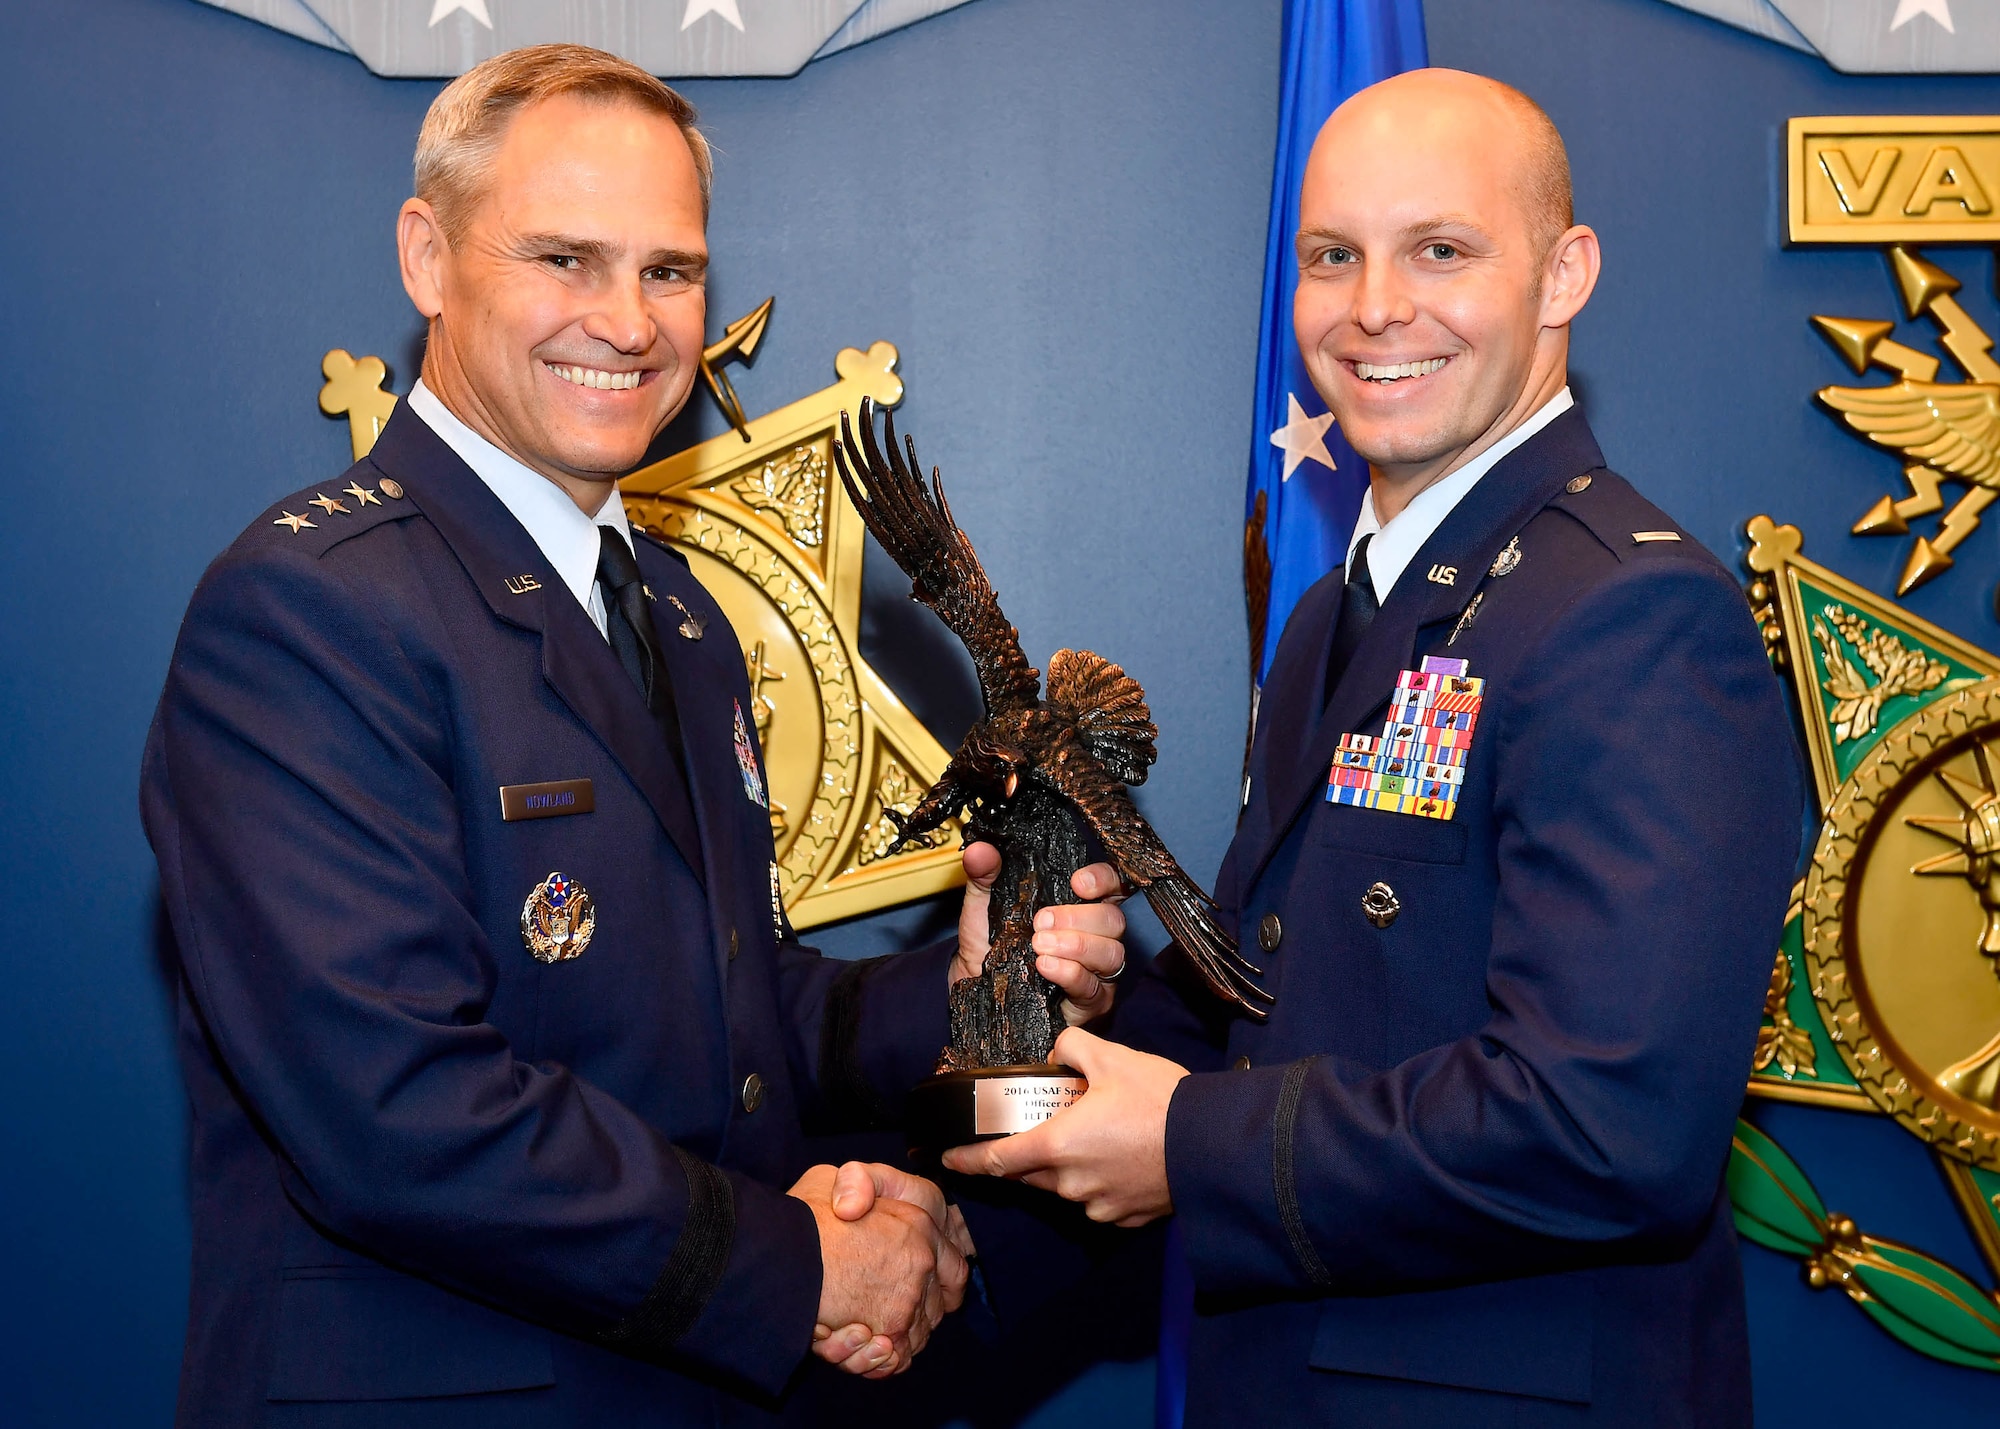 Lt. Gen. Mark C. Nowland, deputy chief of staff for operations, Headquarters U.S. Air Force, Washington, D.C., presents the Special Tactics Officer of the Year Award to 1st Lt. Bryan Hunt, a special tactics officer from the Kentucky Air National Guard’s 123rd Special Tactics Squadron, during a ceremony at the Pentagon in Washington, D.C. on Aug. 24, 2017. Hunt is the first Air Guardsman to receive the award. (U.S. Air Force photo by Scott M. Ash)